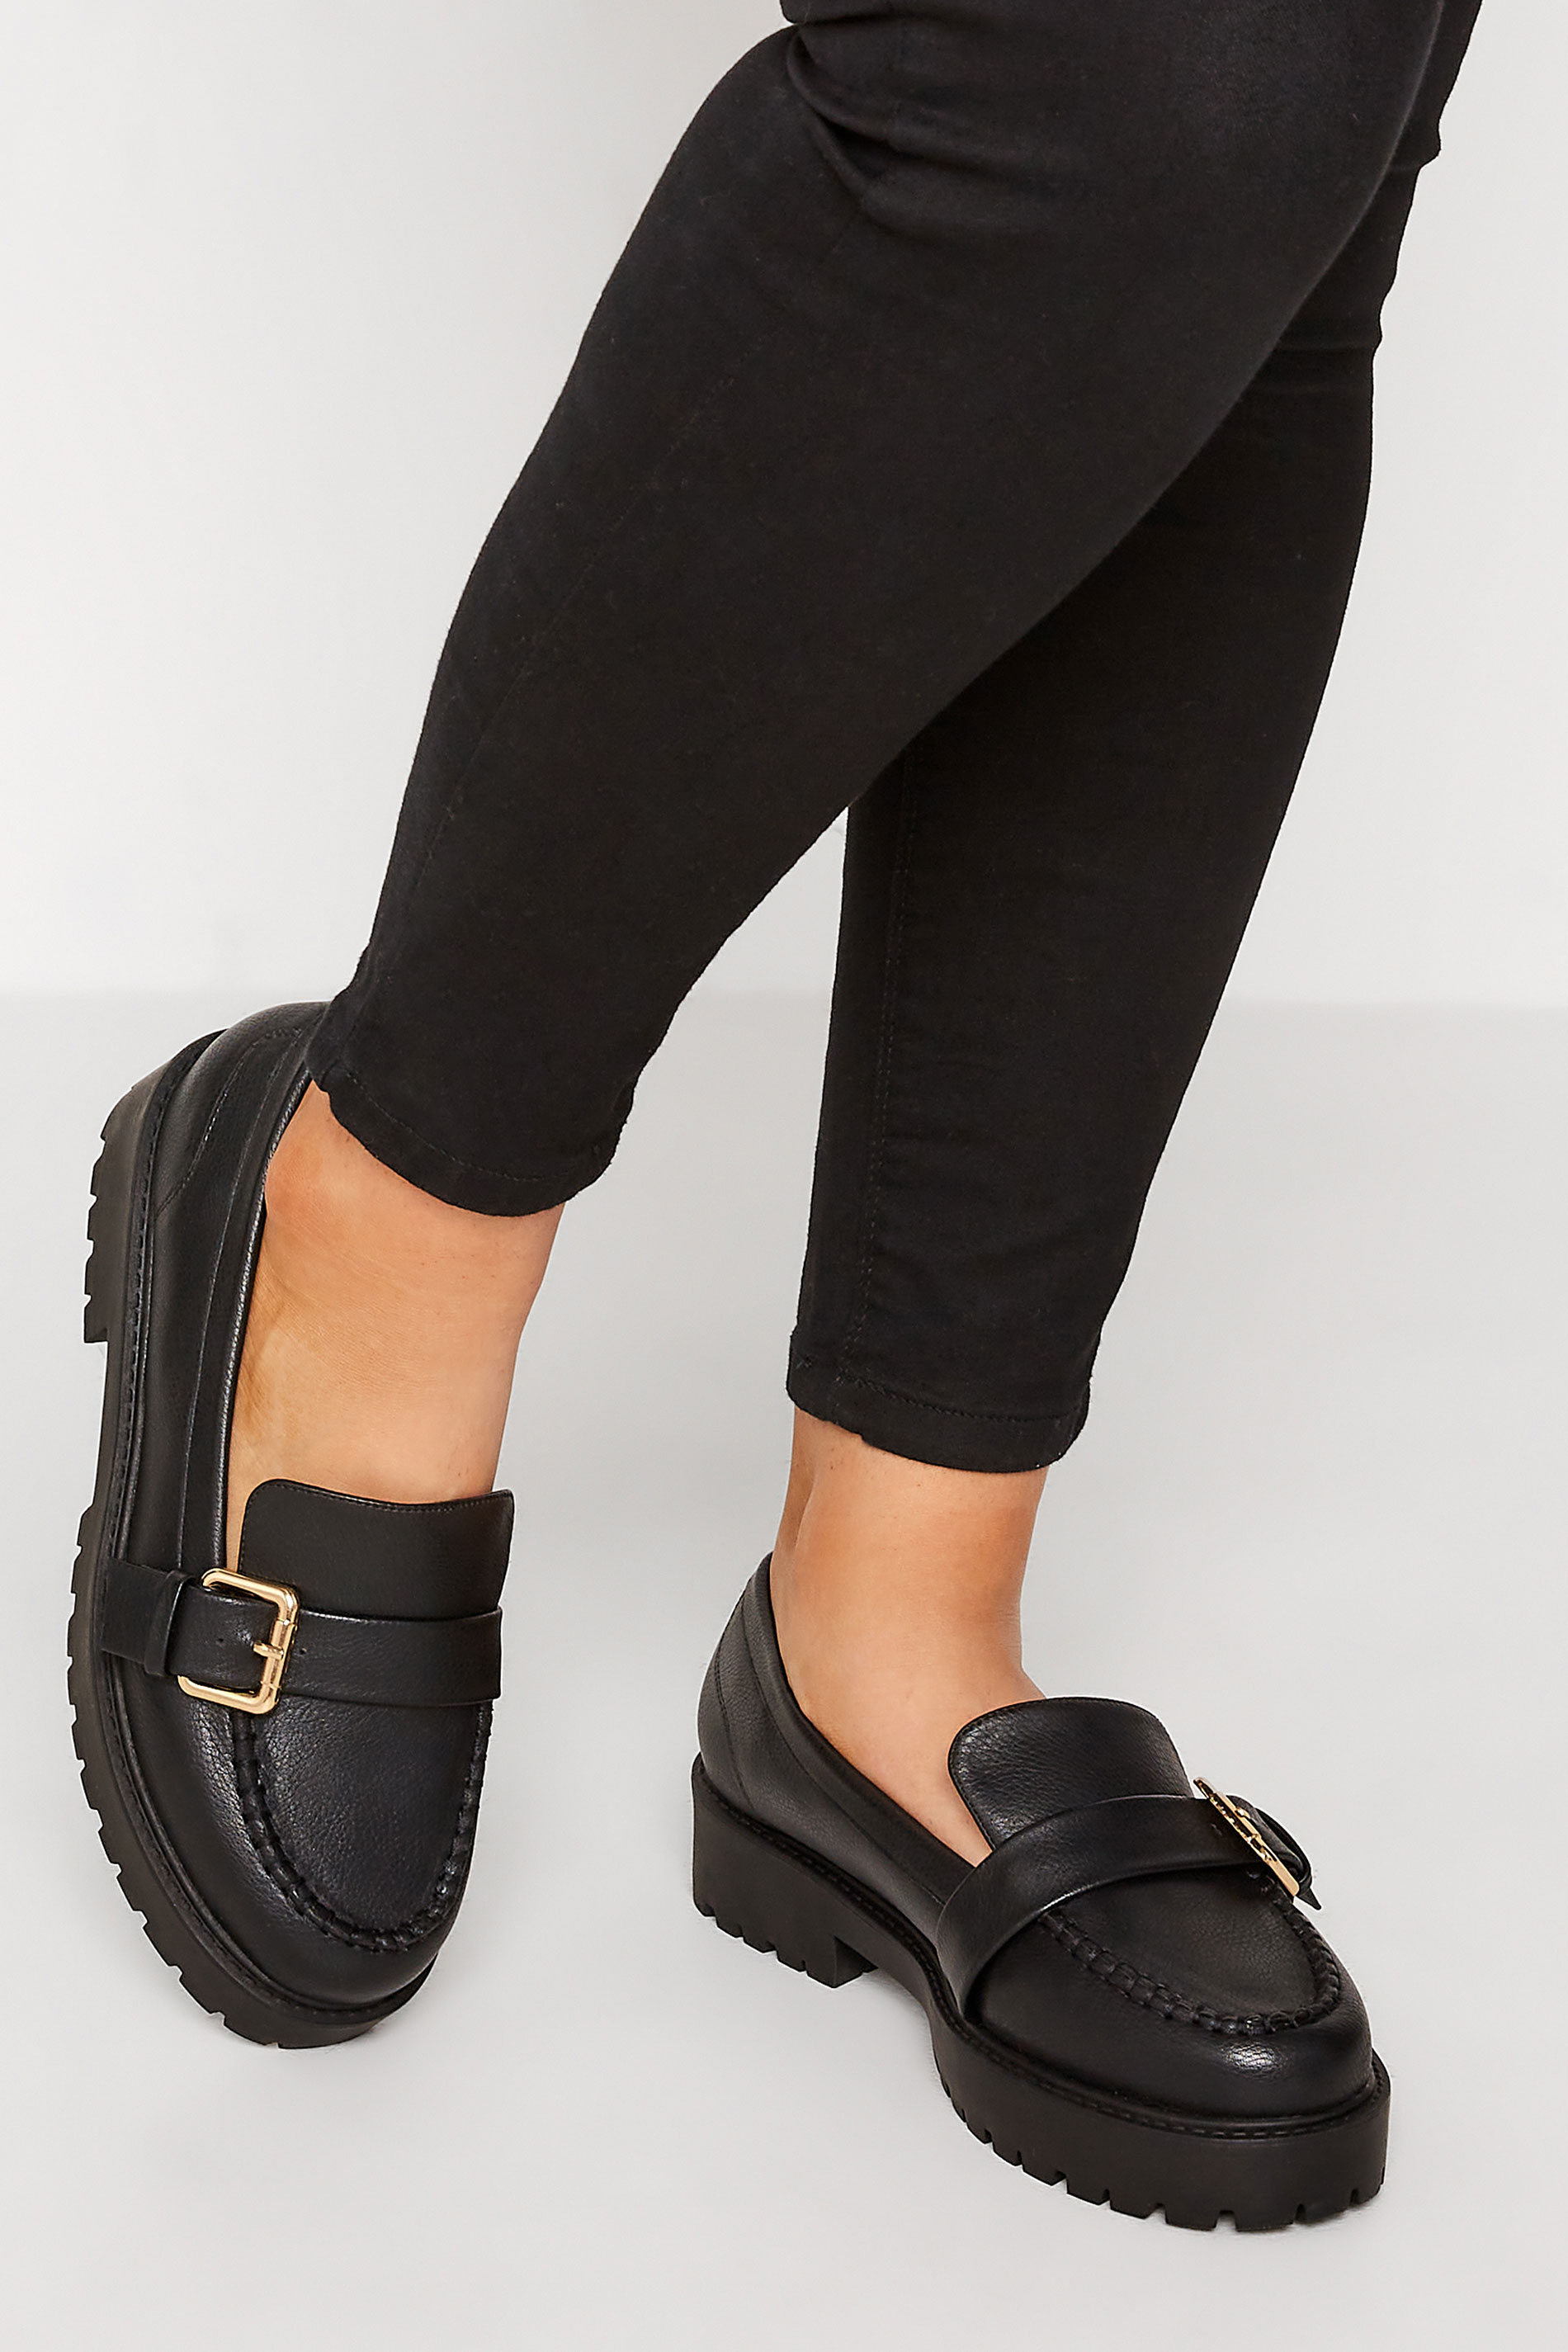 yoursclothing.co.uk | Black Buckle Chunky Loafers In Extra Wide EEE Fit